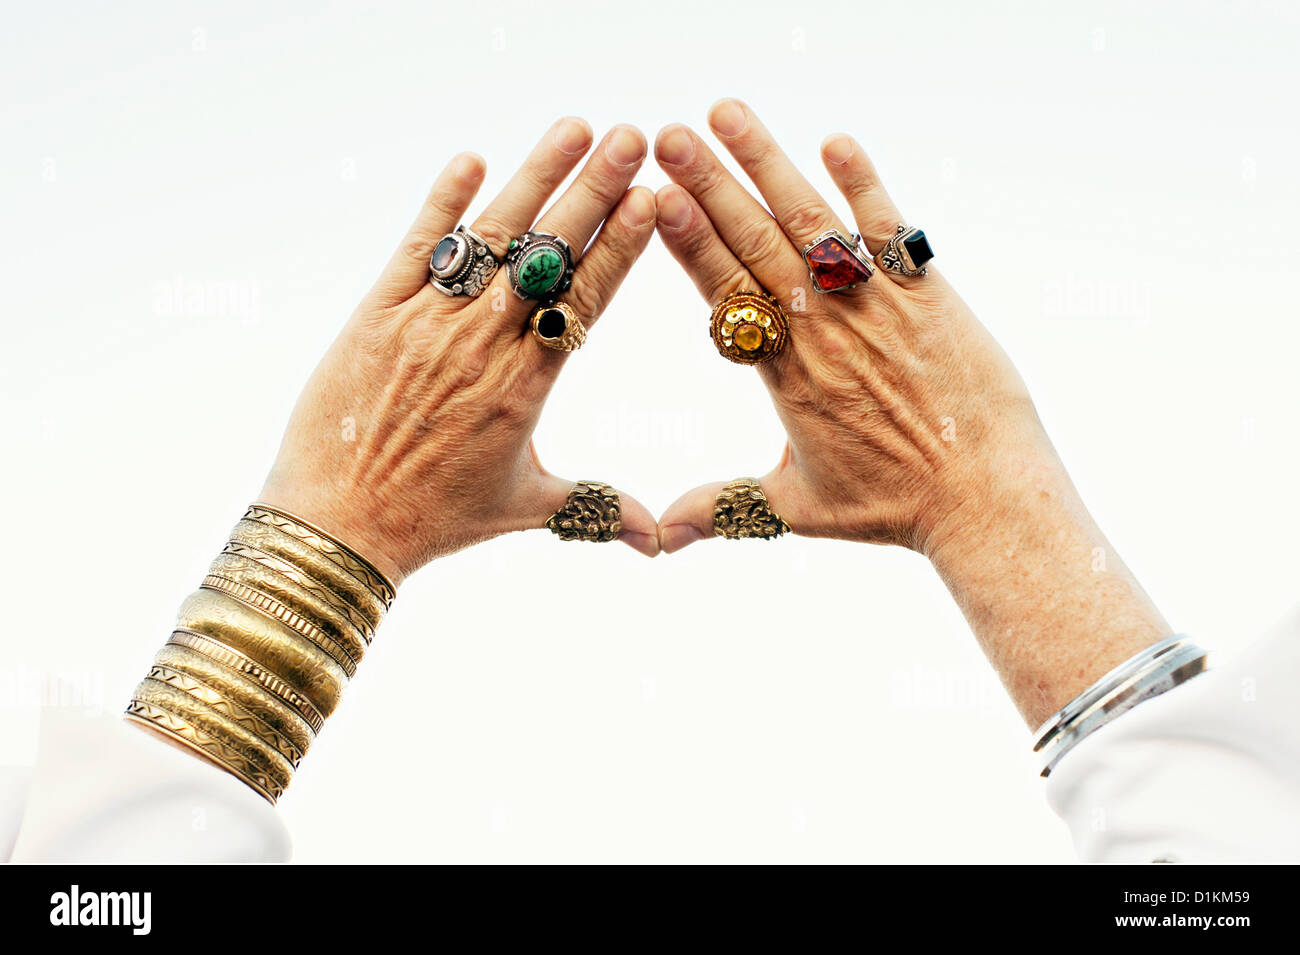 Bejeweled mature male hands framing a vision. Stock Photo